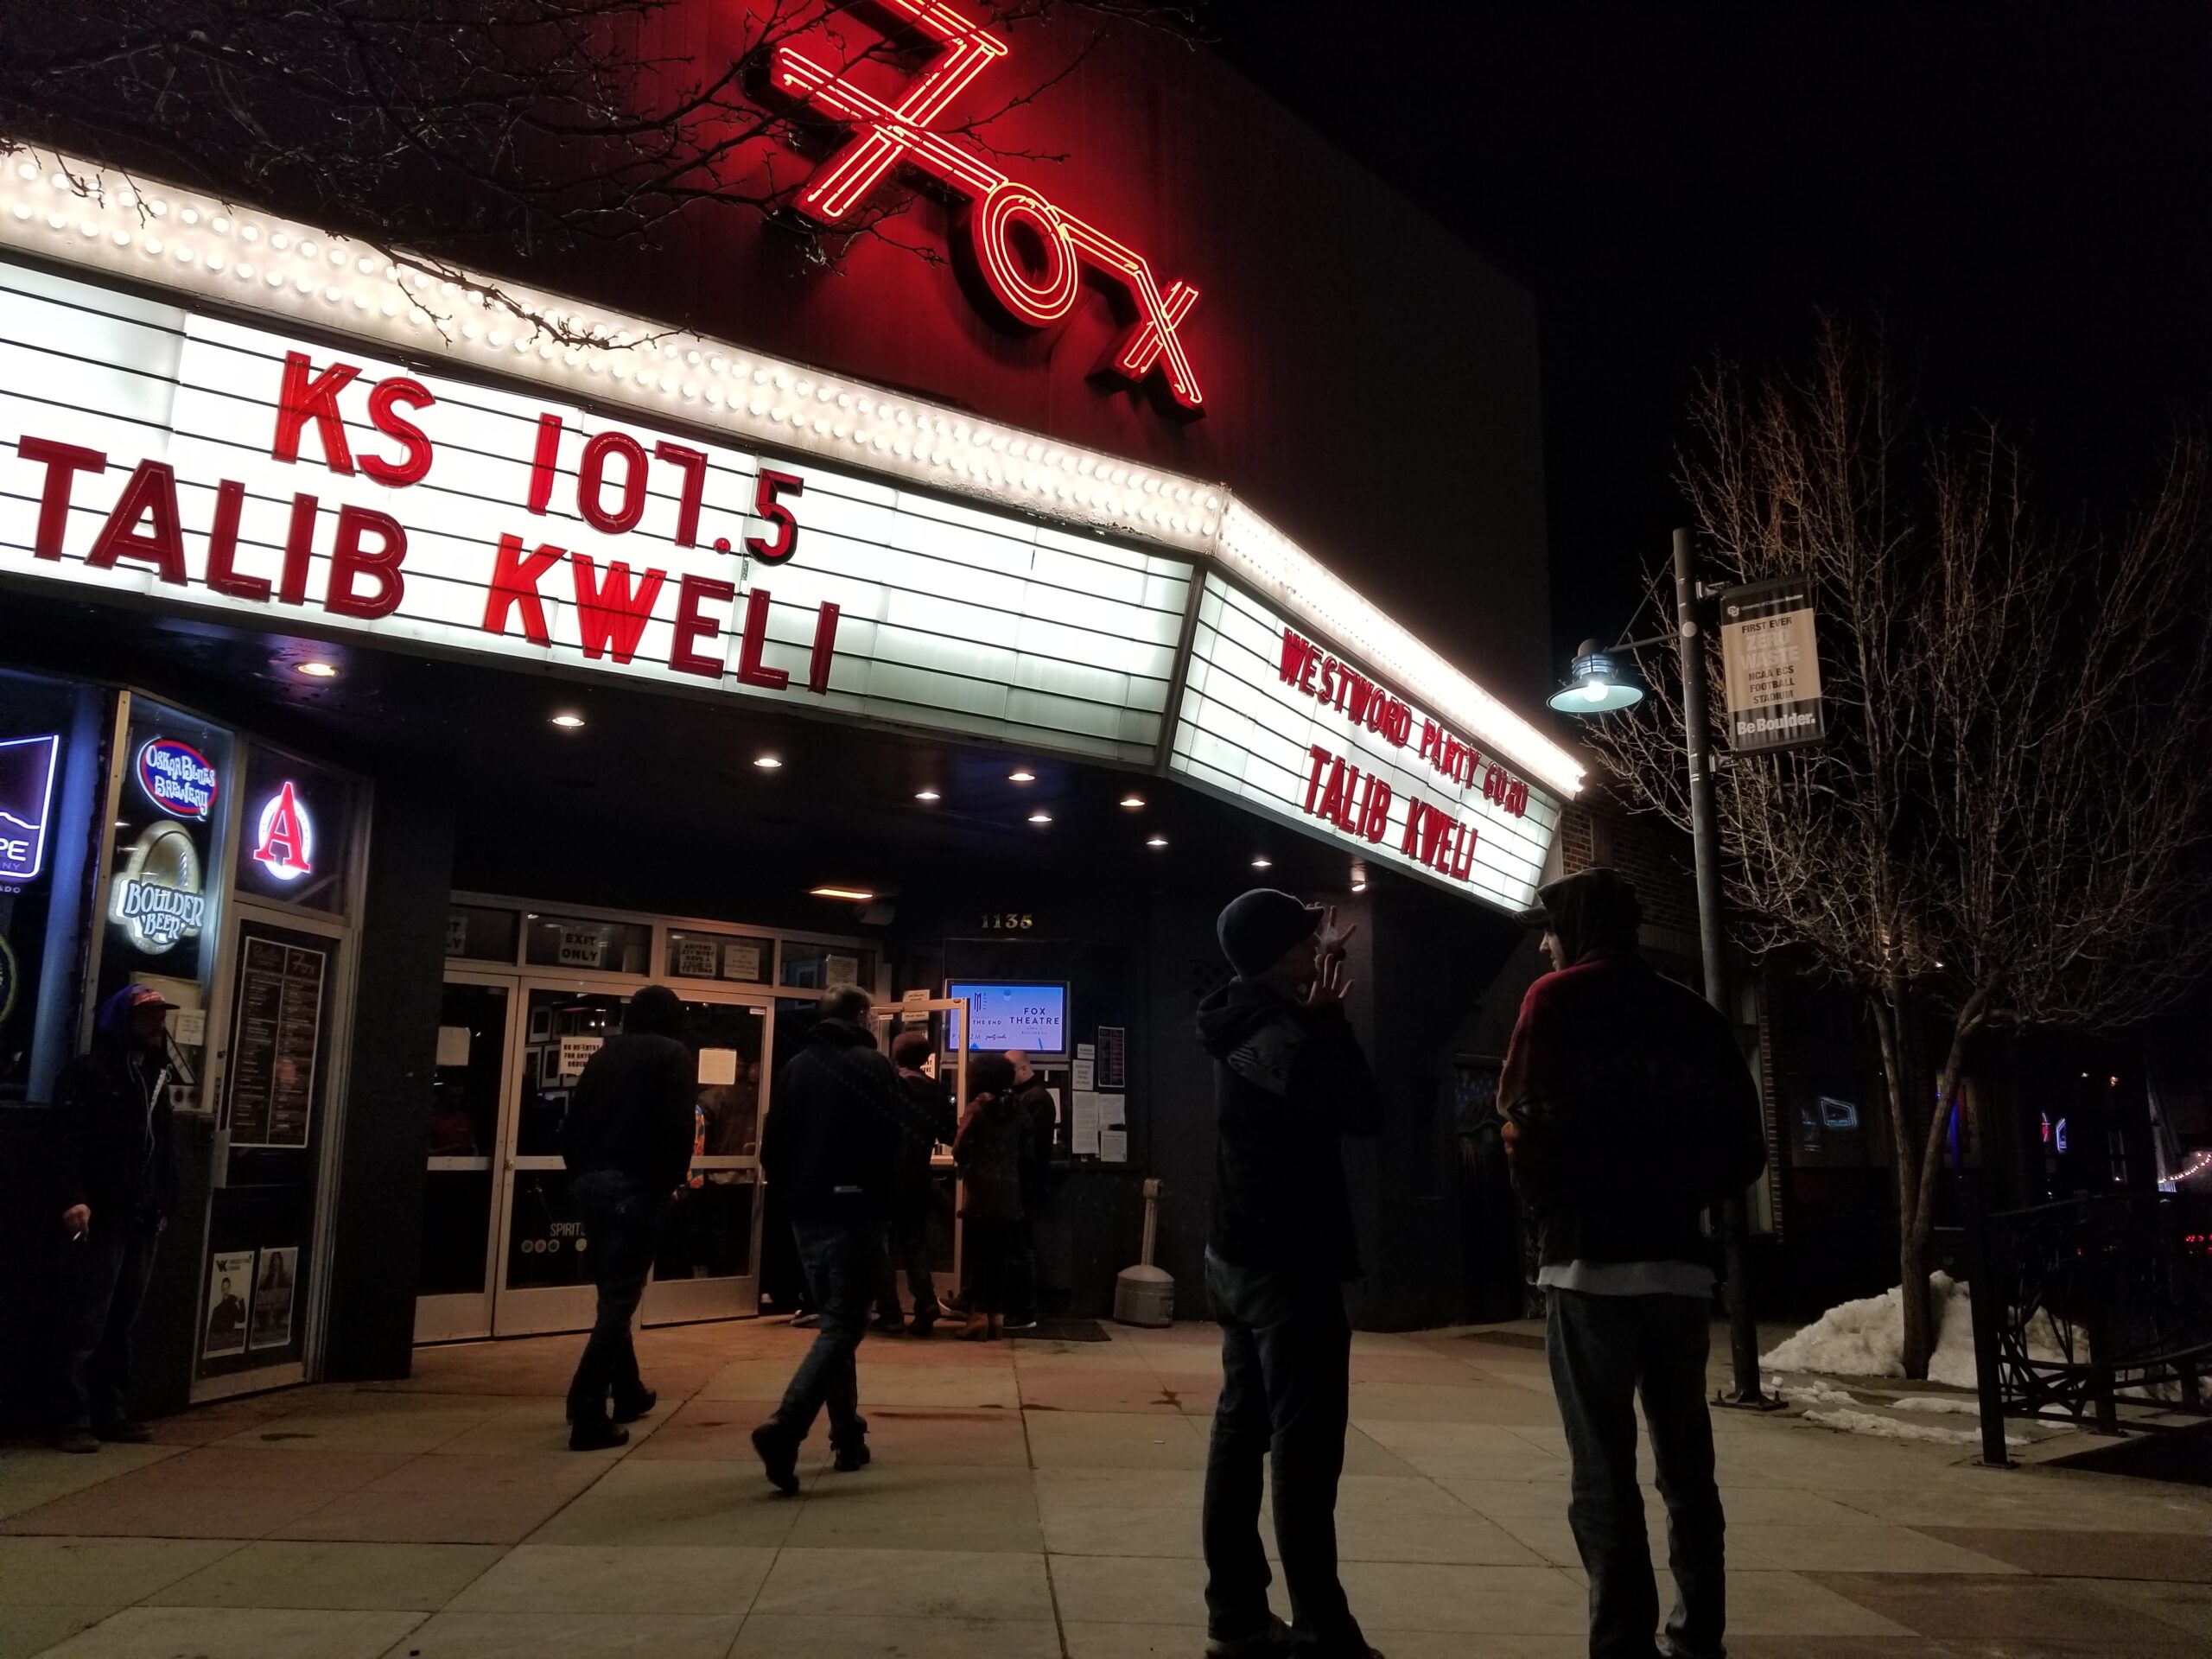 The Fox Theater in Boulder, Colorado on February 27, 2018. Photo by: Matthew McGuire